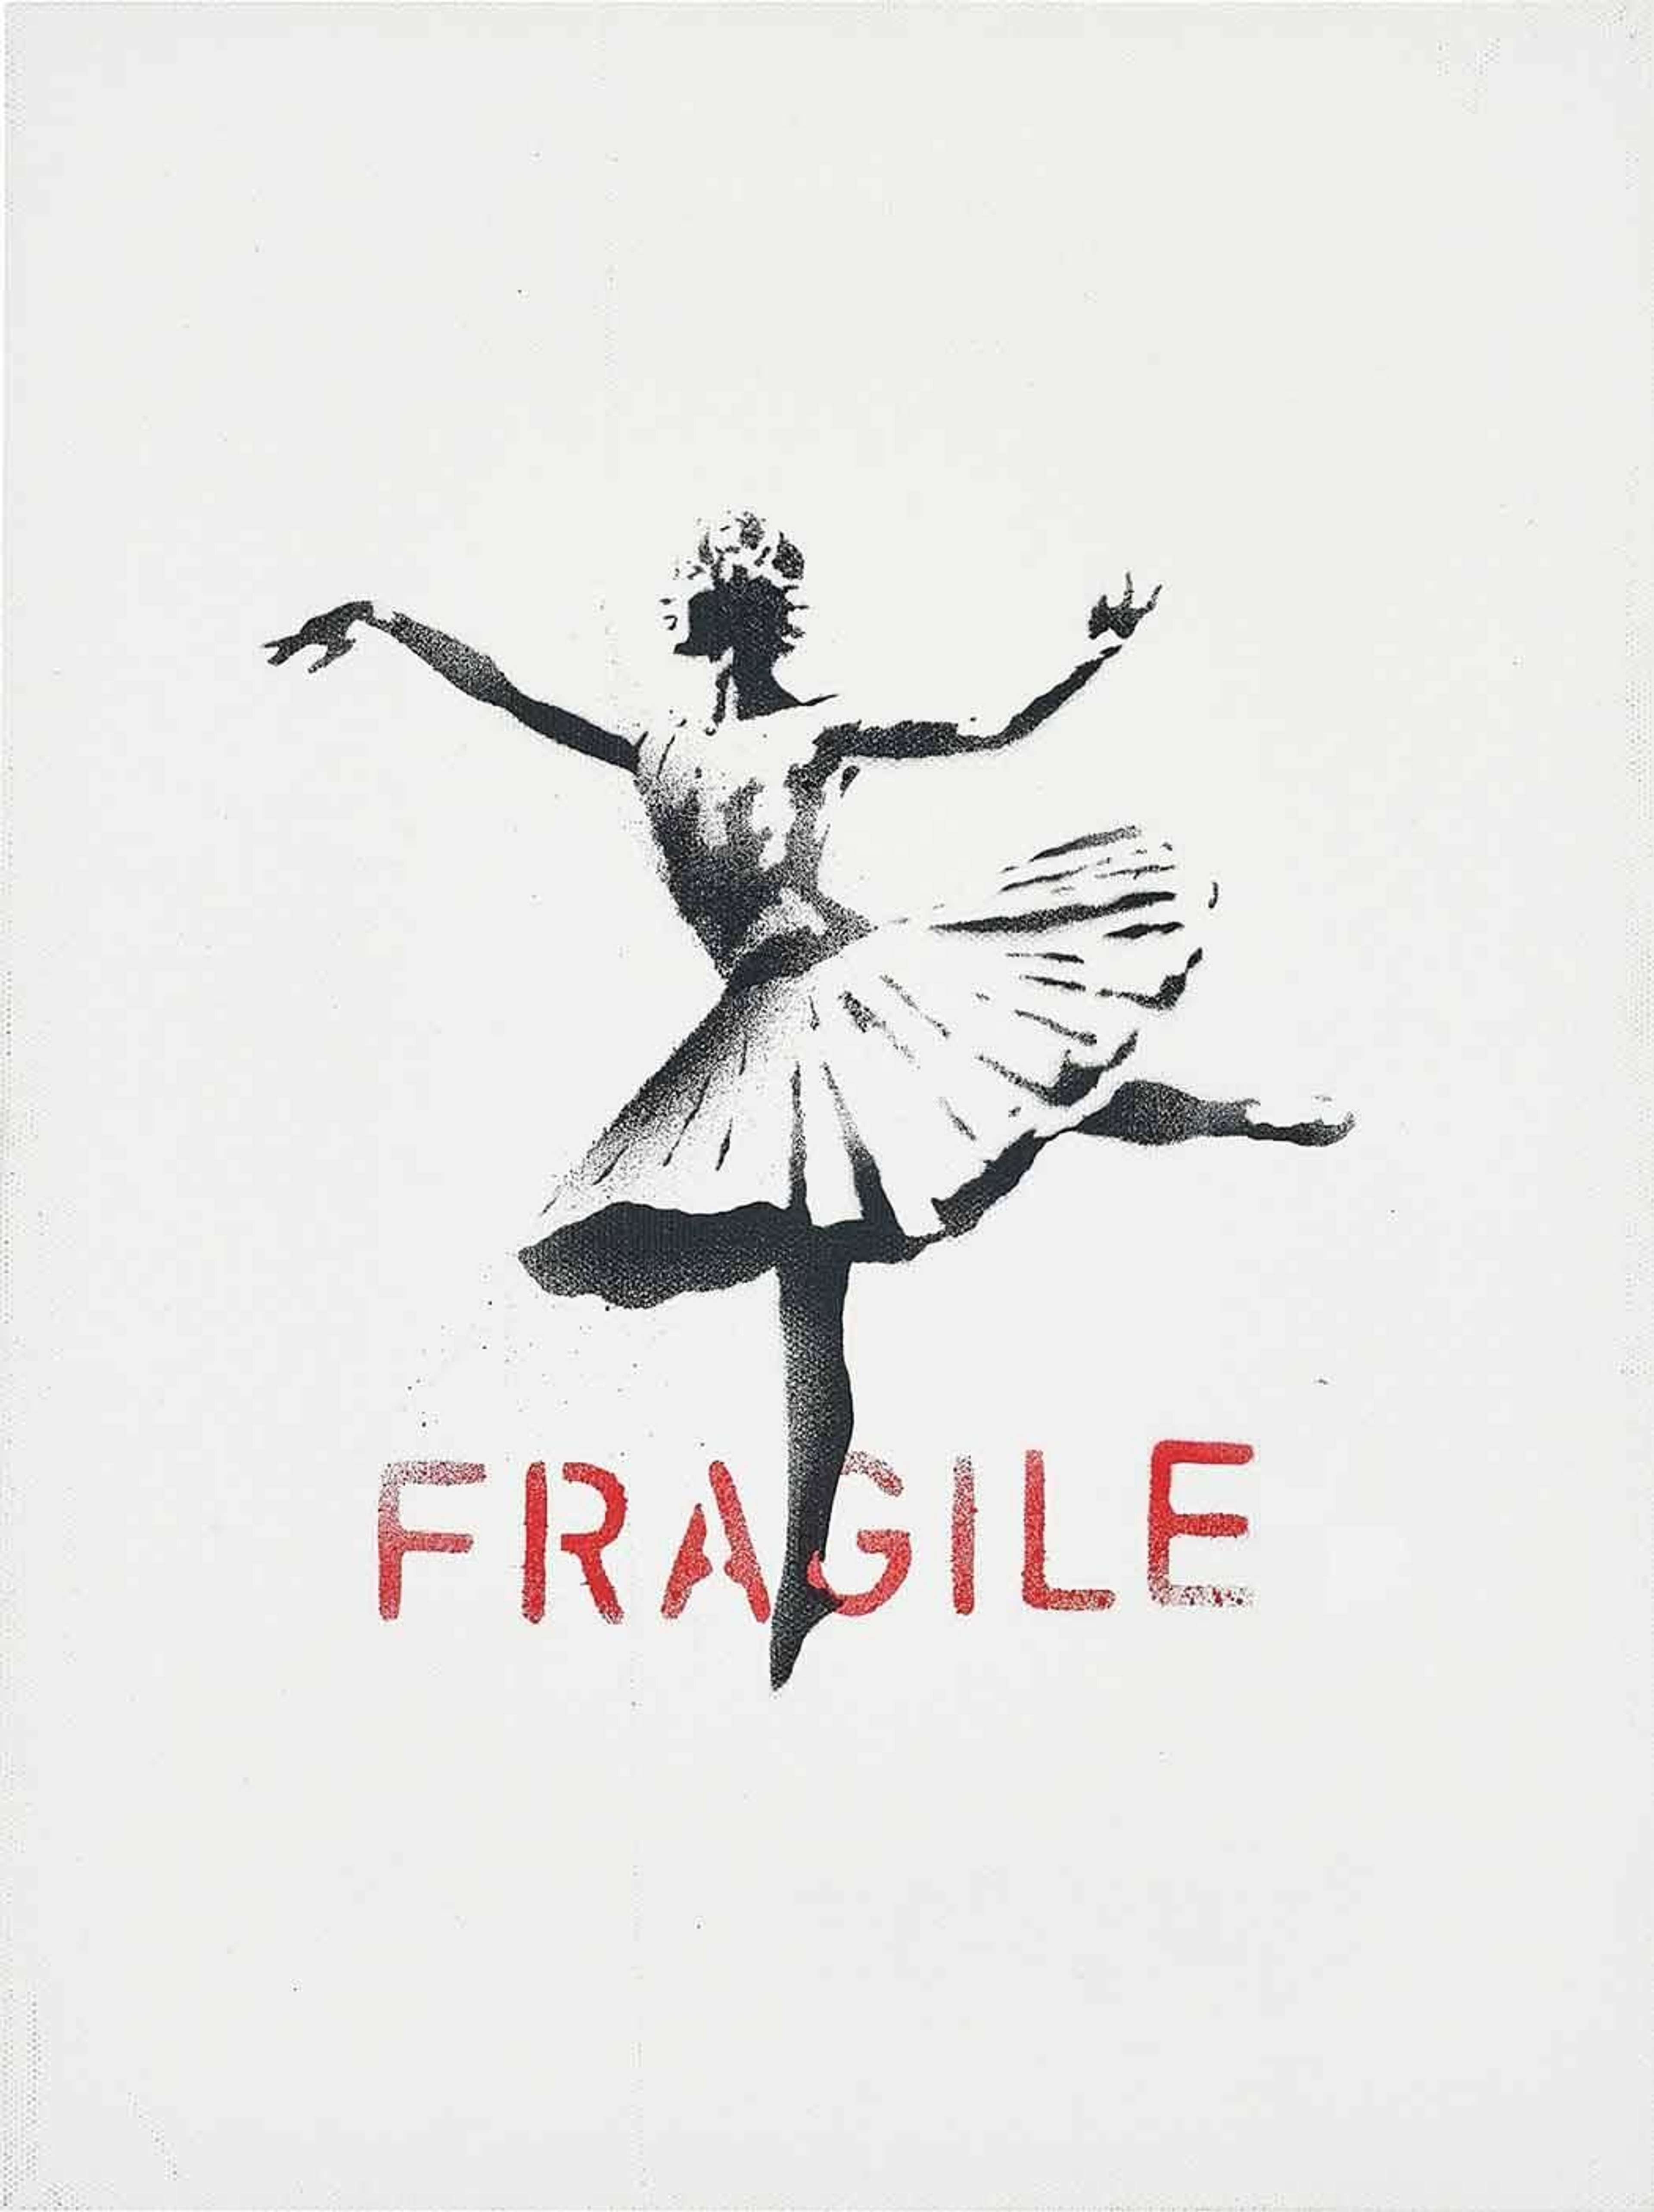 Banksy’s Ballerina CP. A spray paint work of a ballerina dancing with the text “FRAGILE”. 